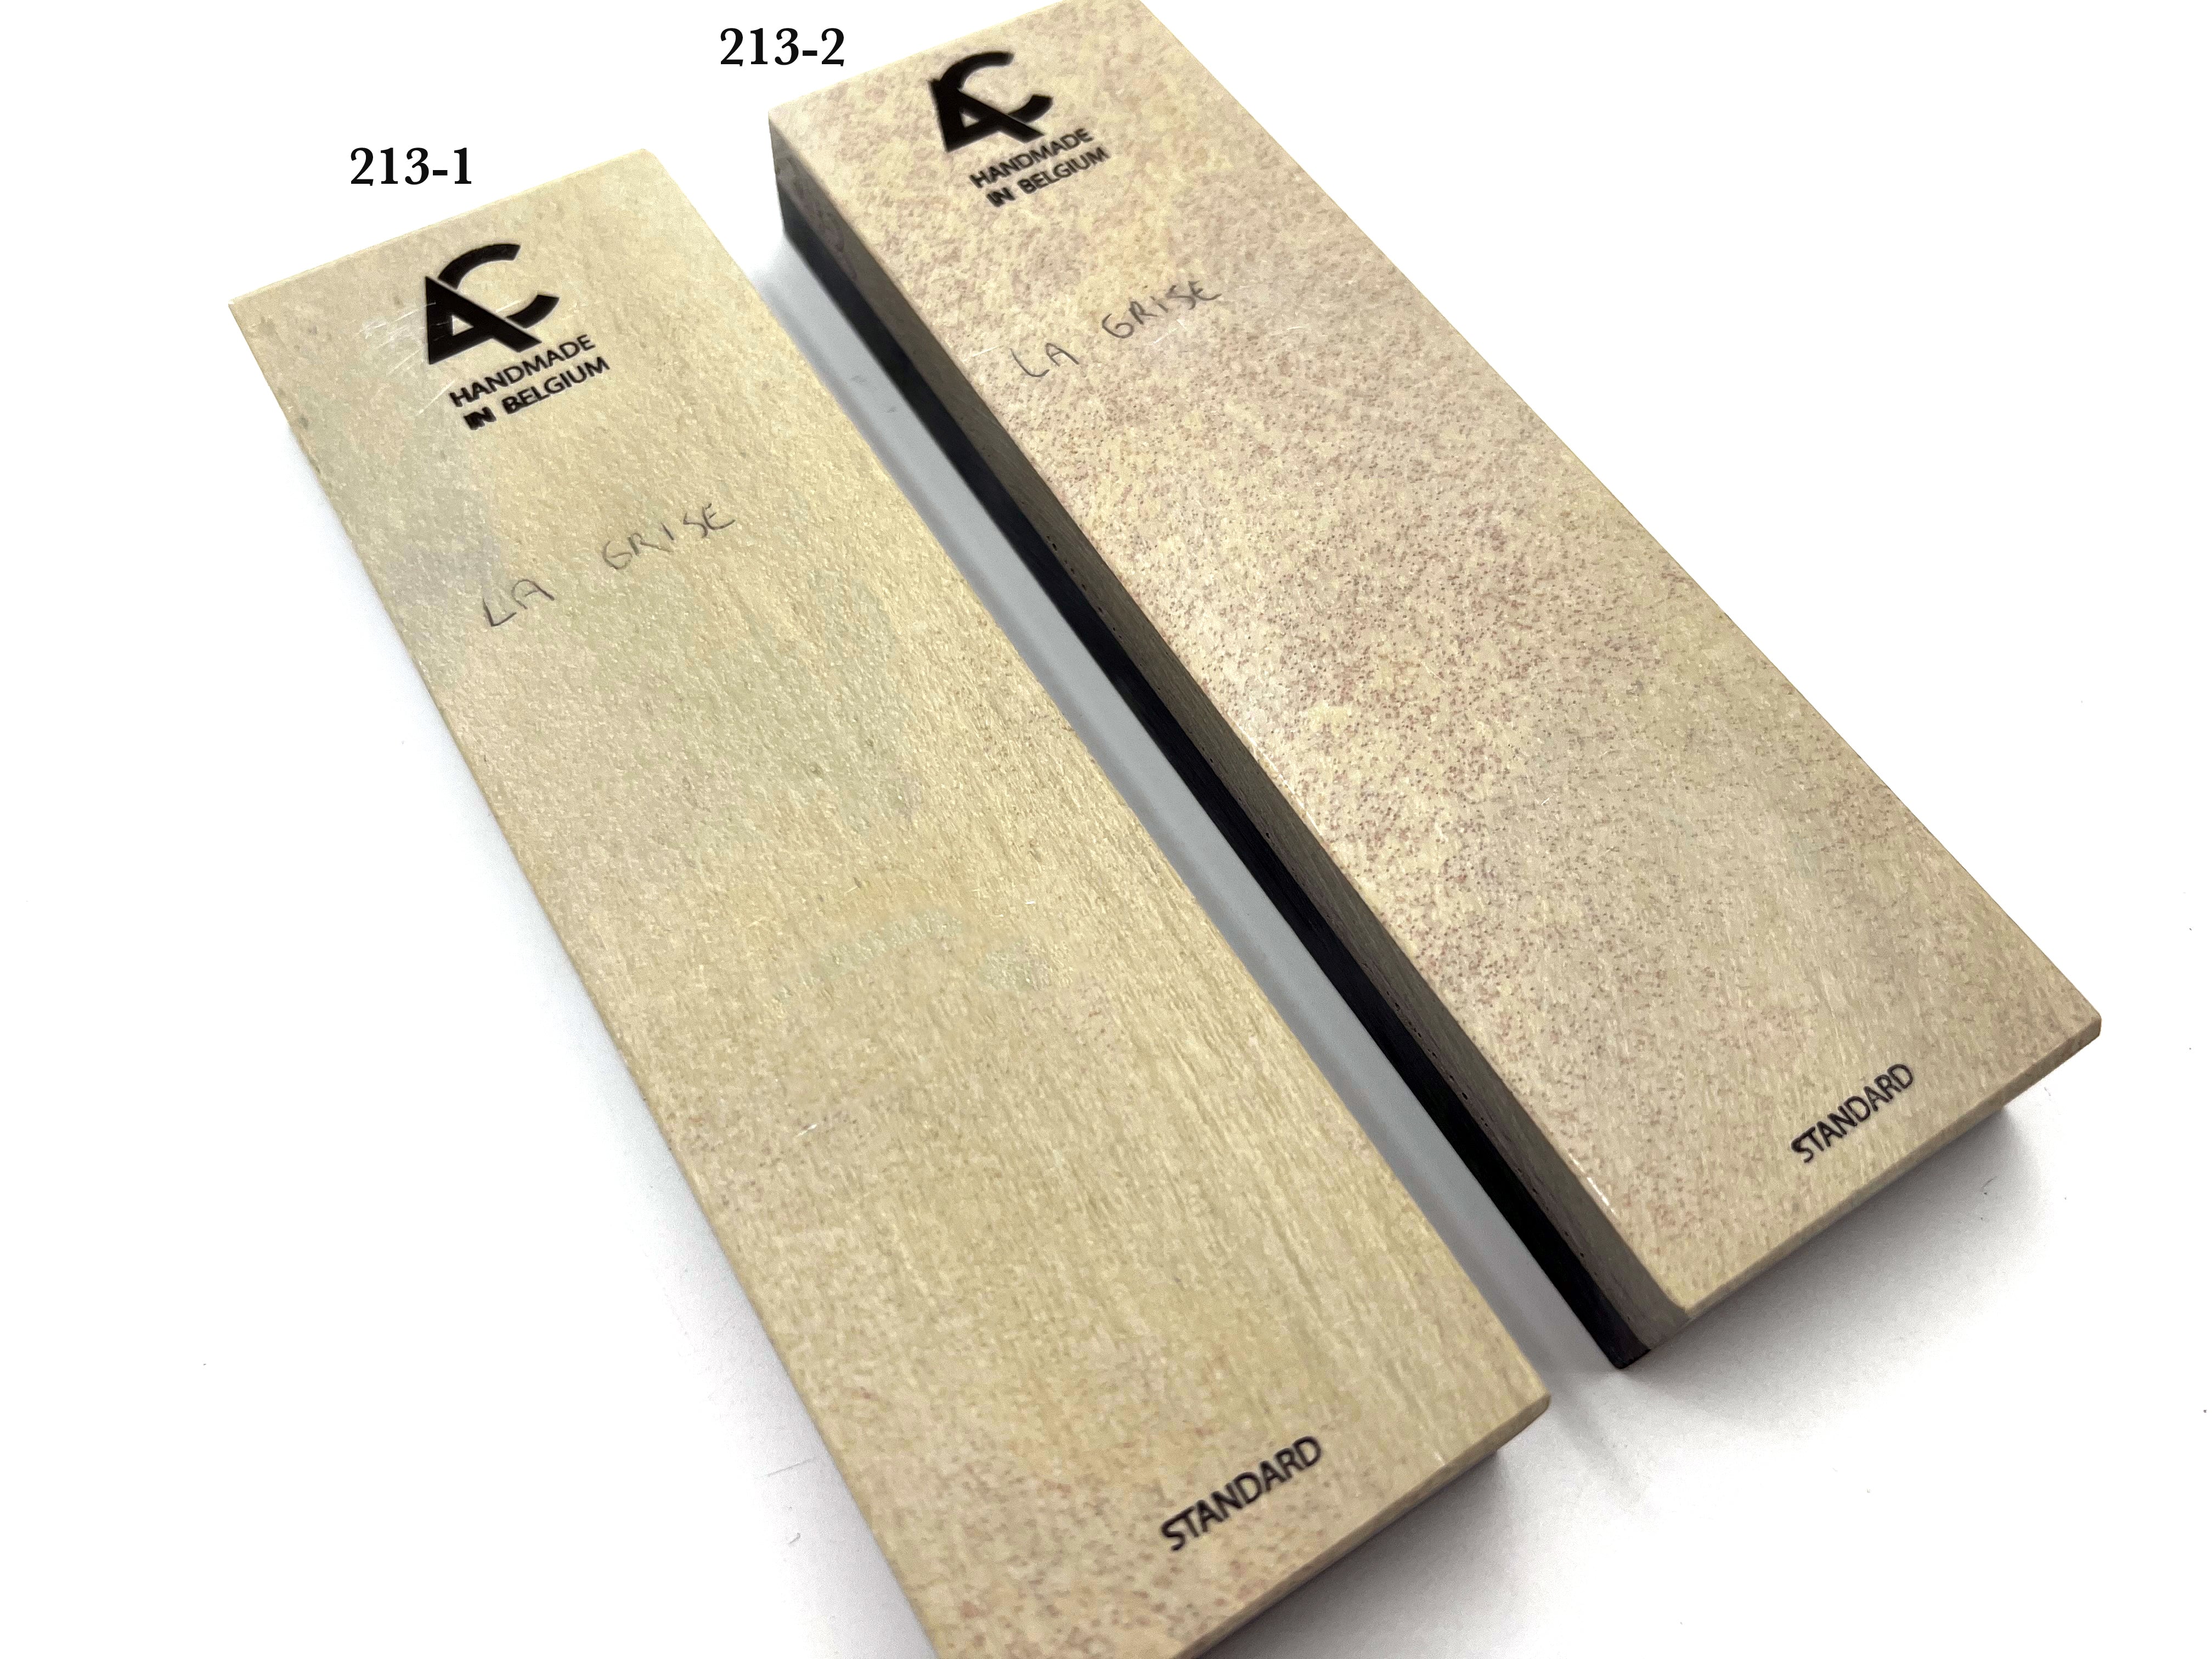 Belgian Coticule - 200mm x 60mm (8 x 2.4") Standard Grade Sharpening Stone with Slurry Stone - CHOOSE YOUR STONE